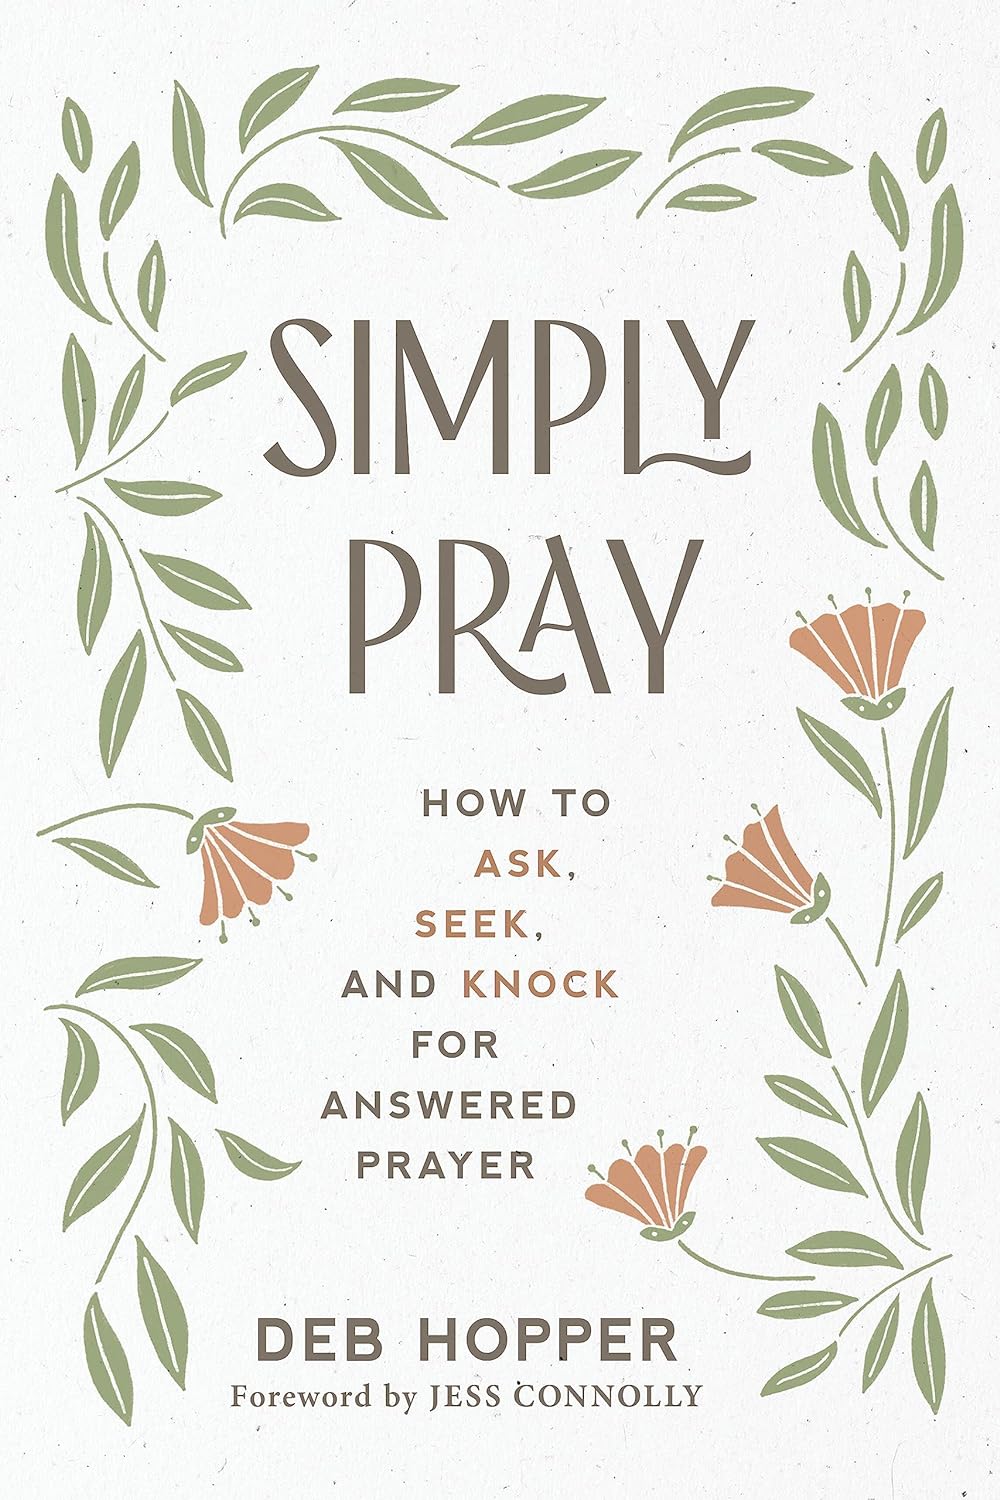 a book to understand the power of prayer